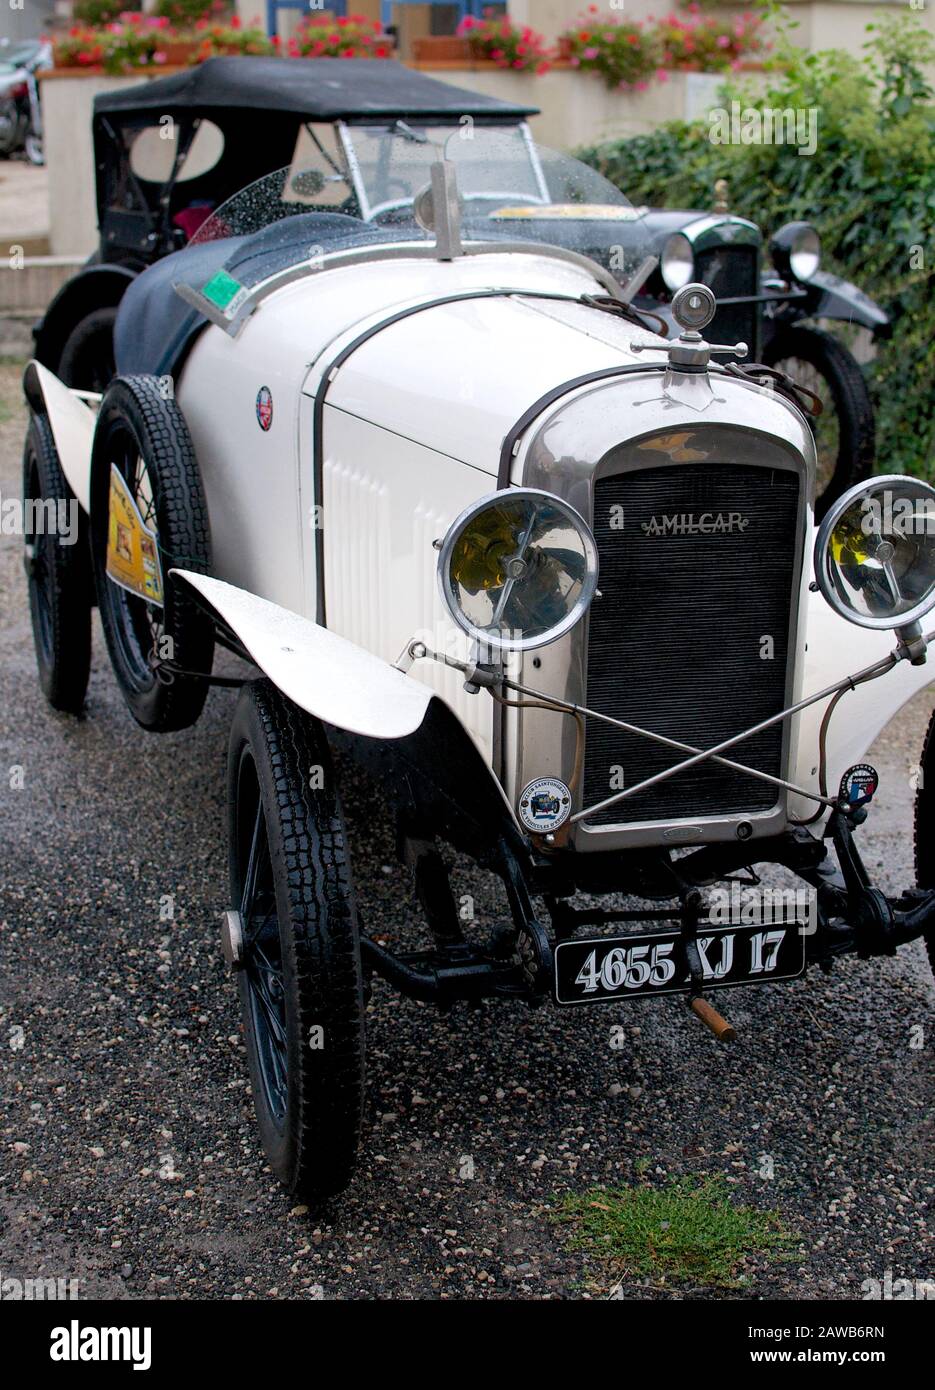 Amilcar roadster during the event 'Balade Perigord & Lot' on 3-4 October 2015 in the South of France. Stock Photo